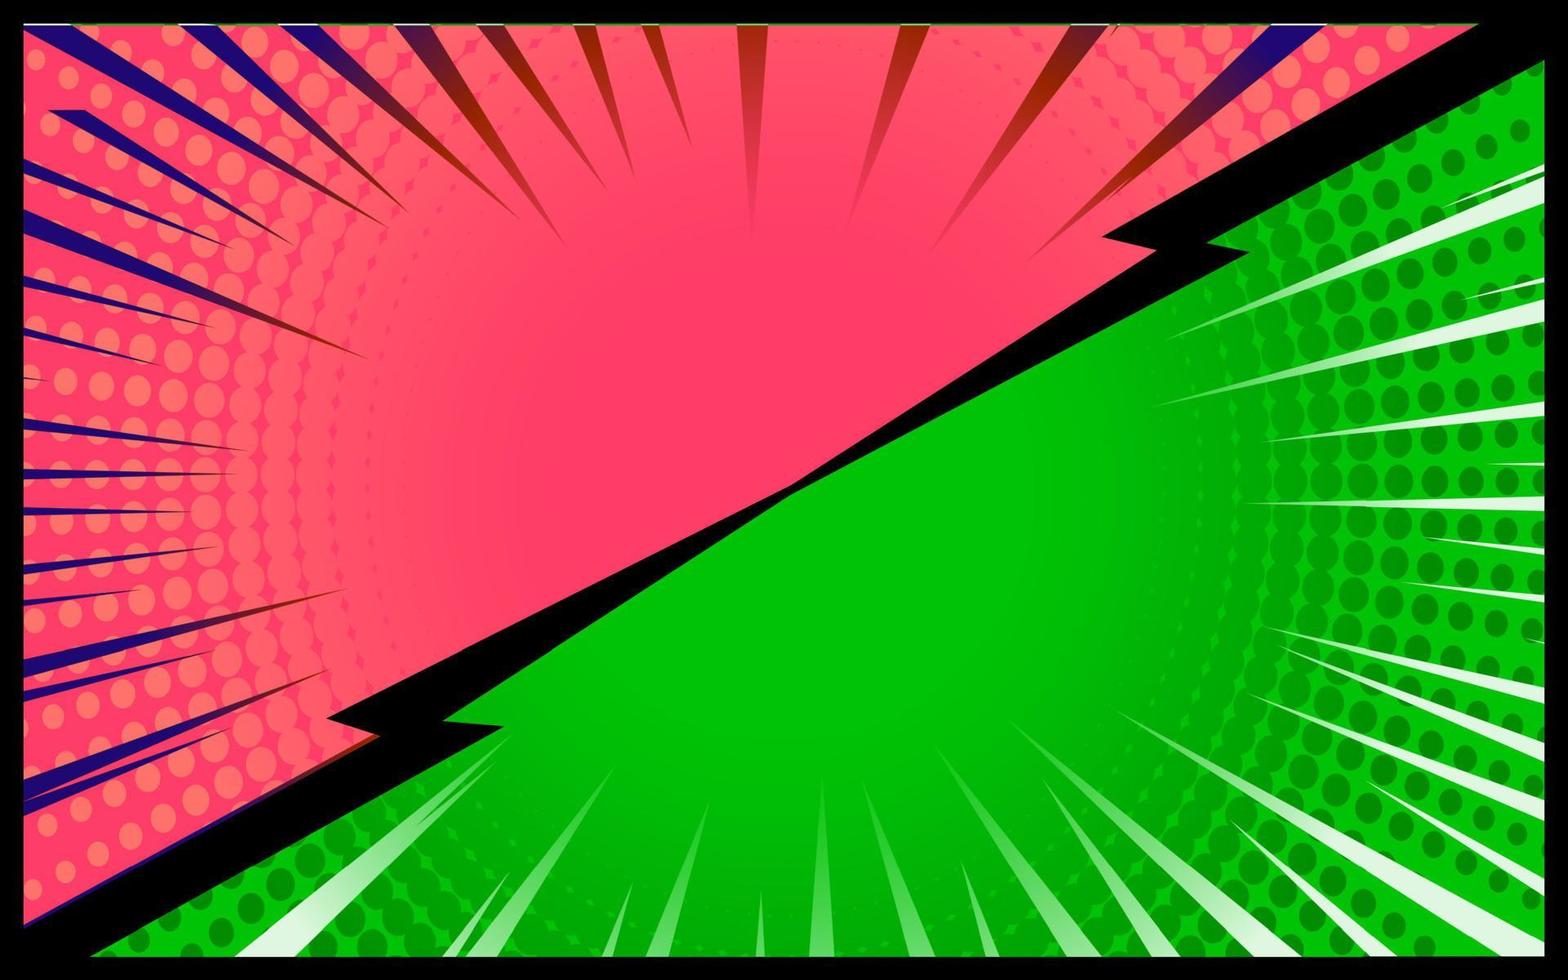 Green and Pink comic background Retro vector